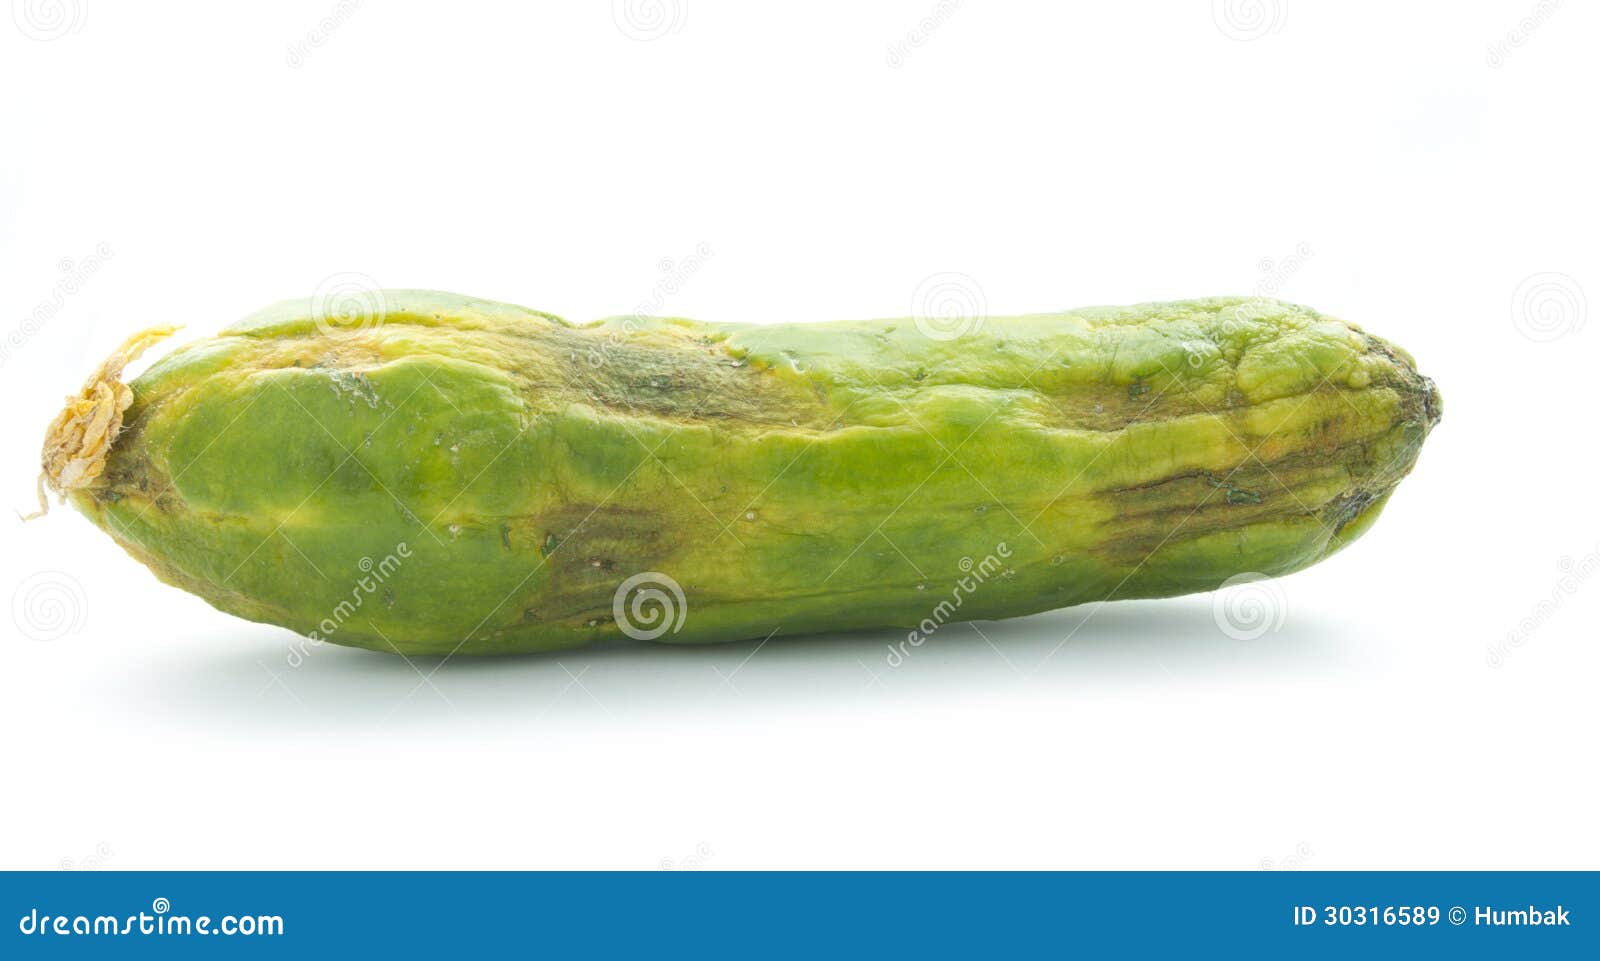 single-rotten-wilted-cucumber-isolated-white-30316589.jpg